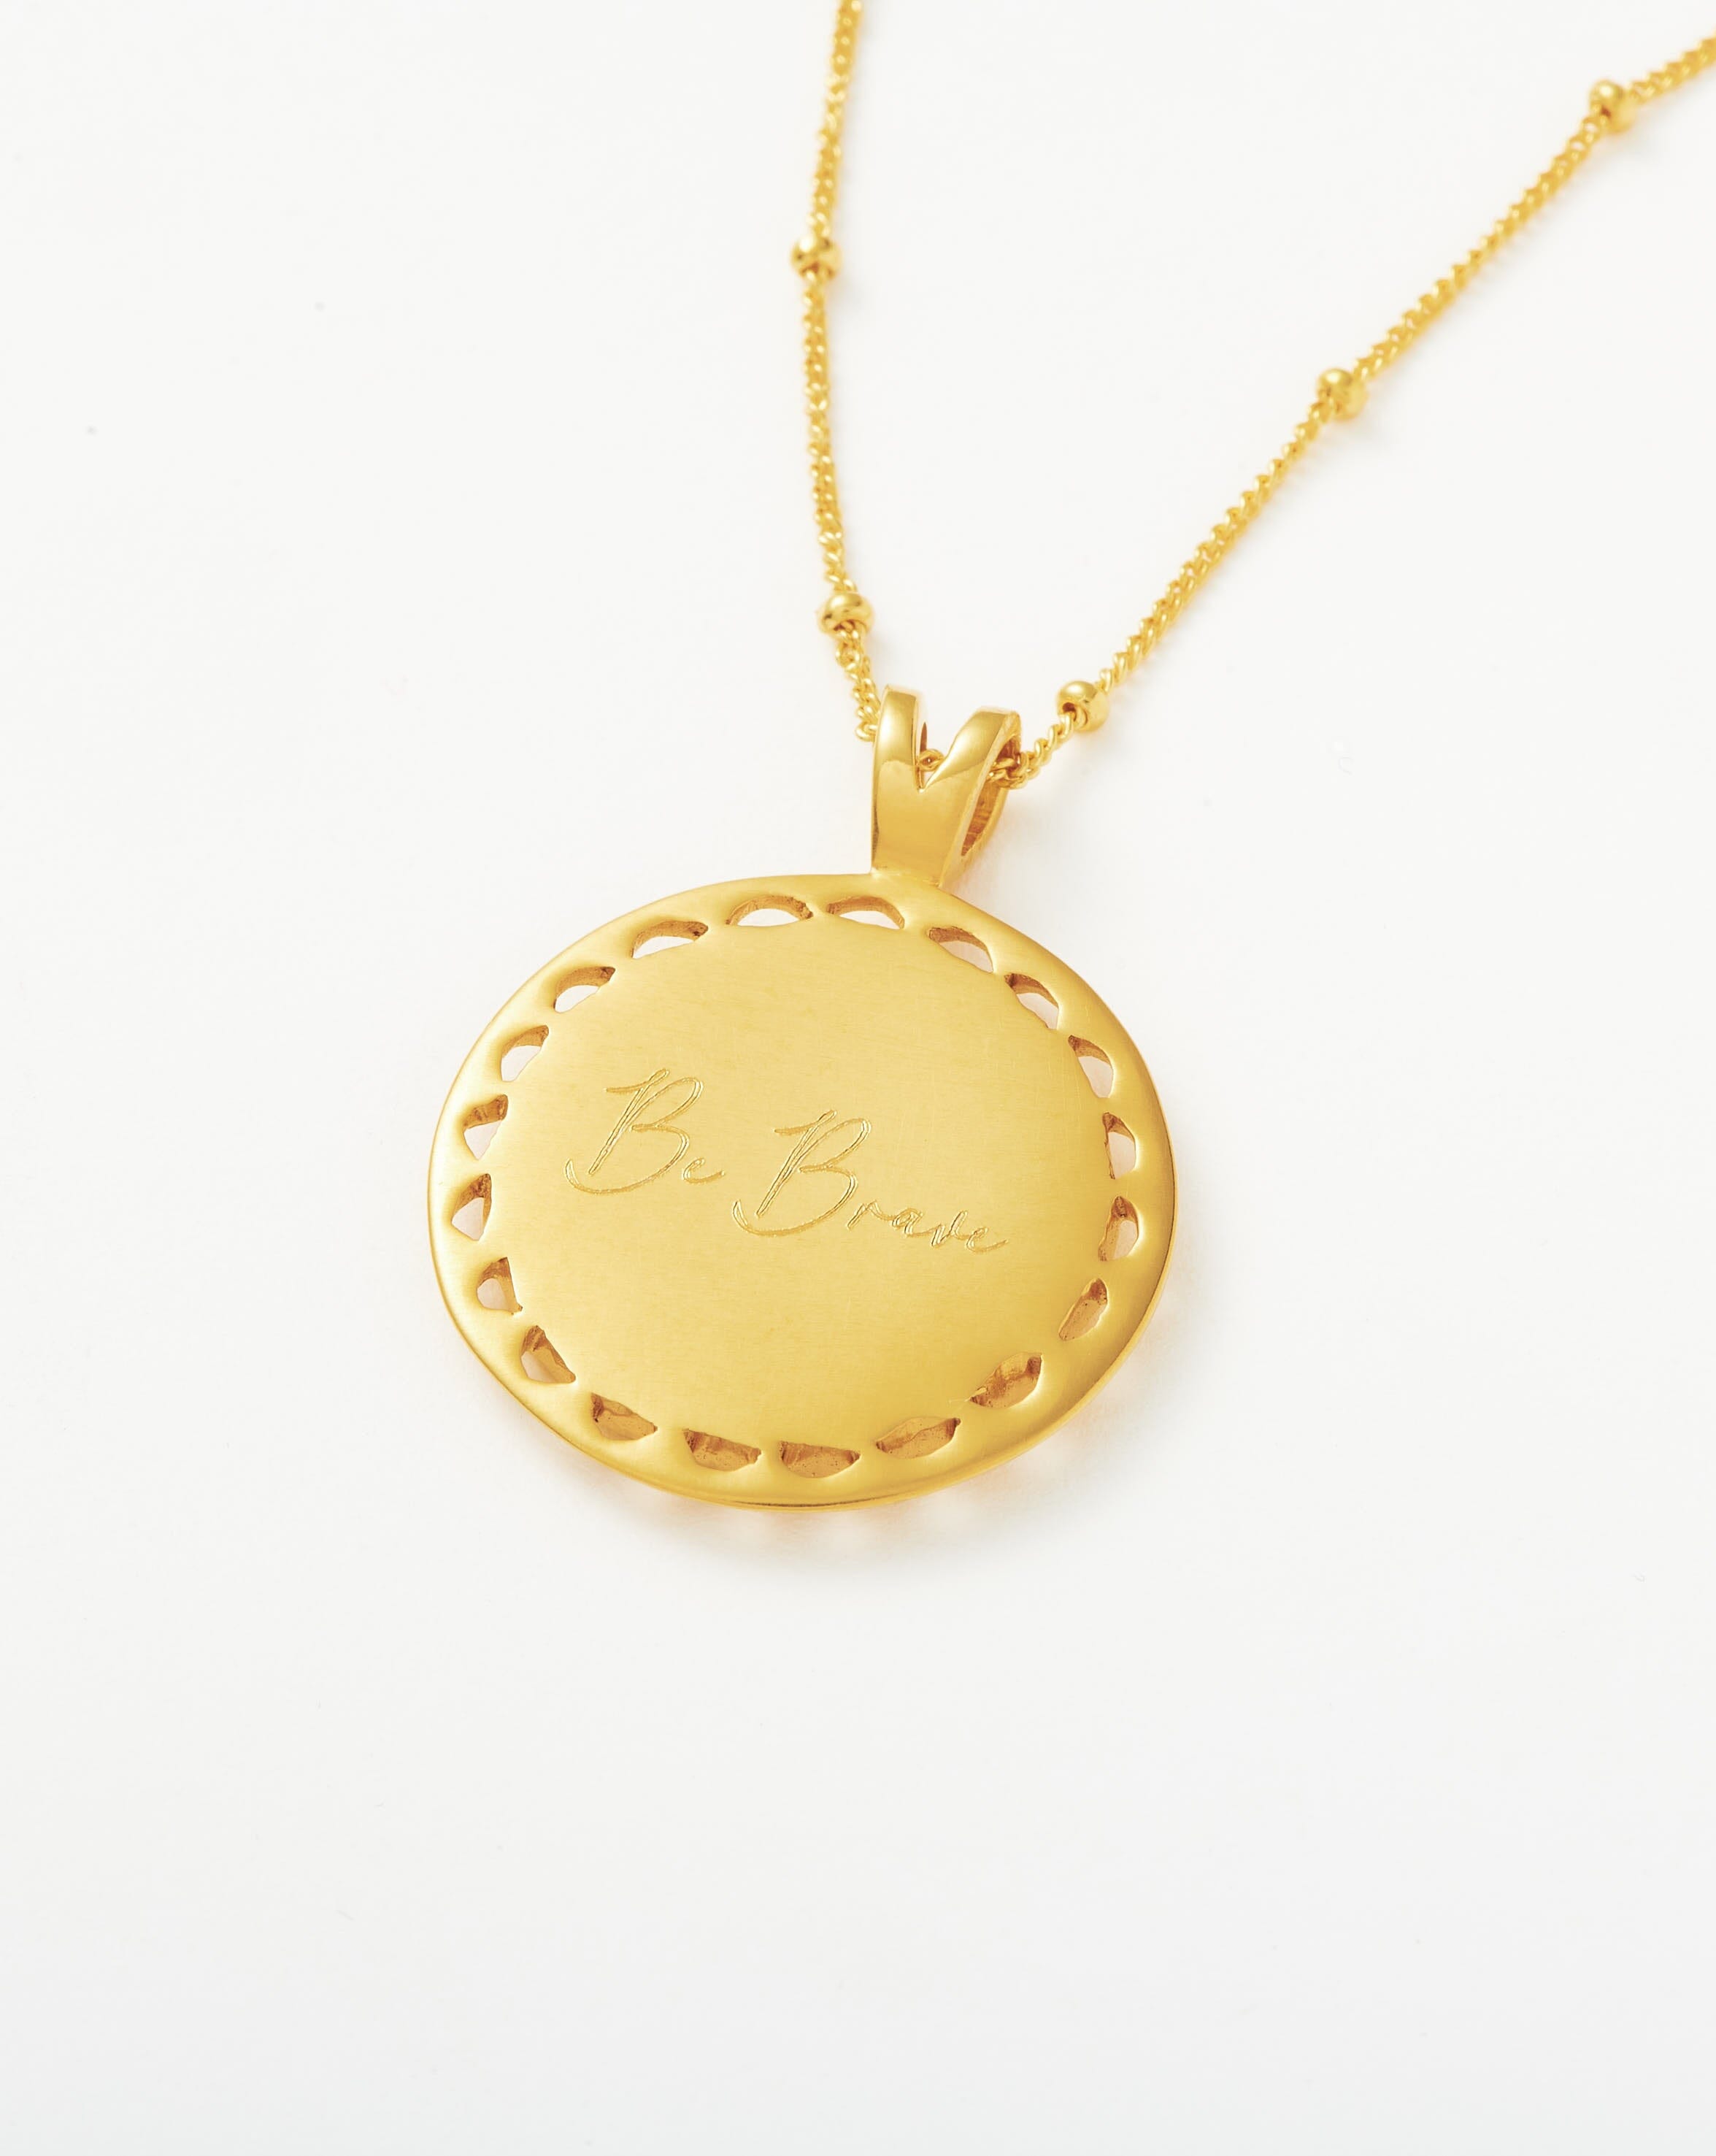 Lucy Williams Engravable Rising Sun Medallion Coin Necklace | 18ct Gold Plated Vermeil Necklaces Missoma 